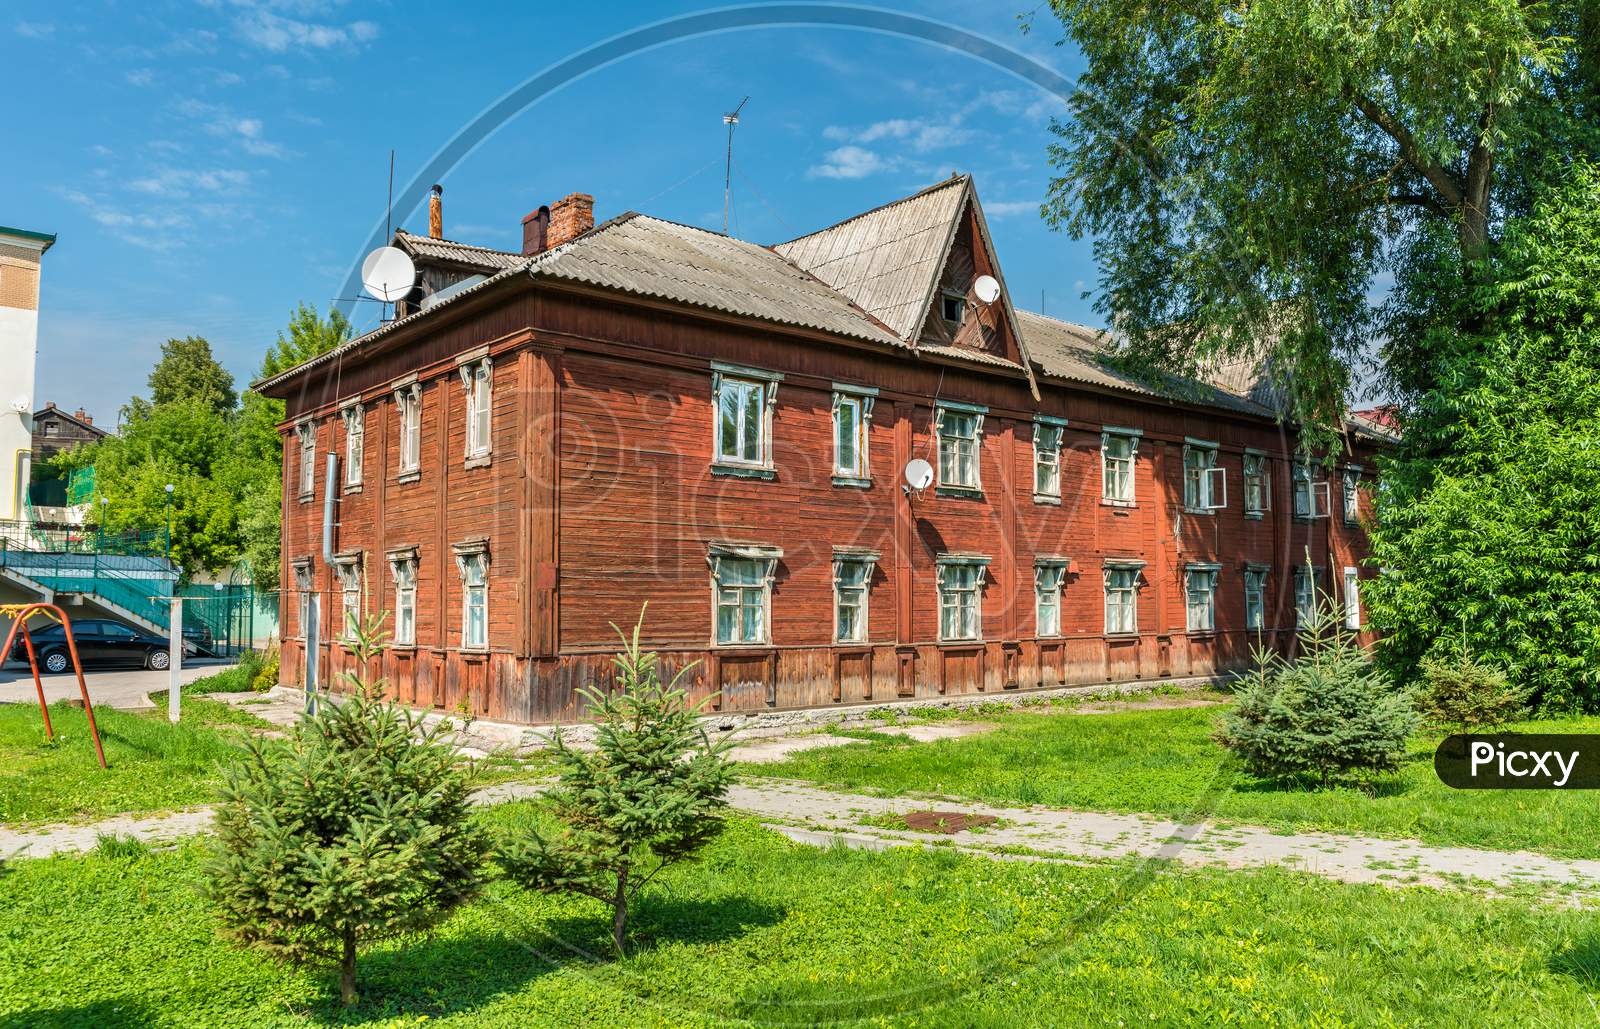 Image Of Old Wooden House In The City Centre Of Ryazan Russia Yv